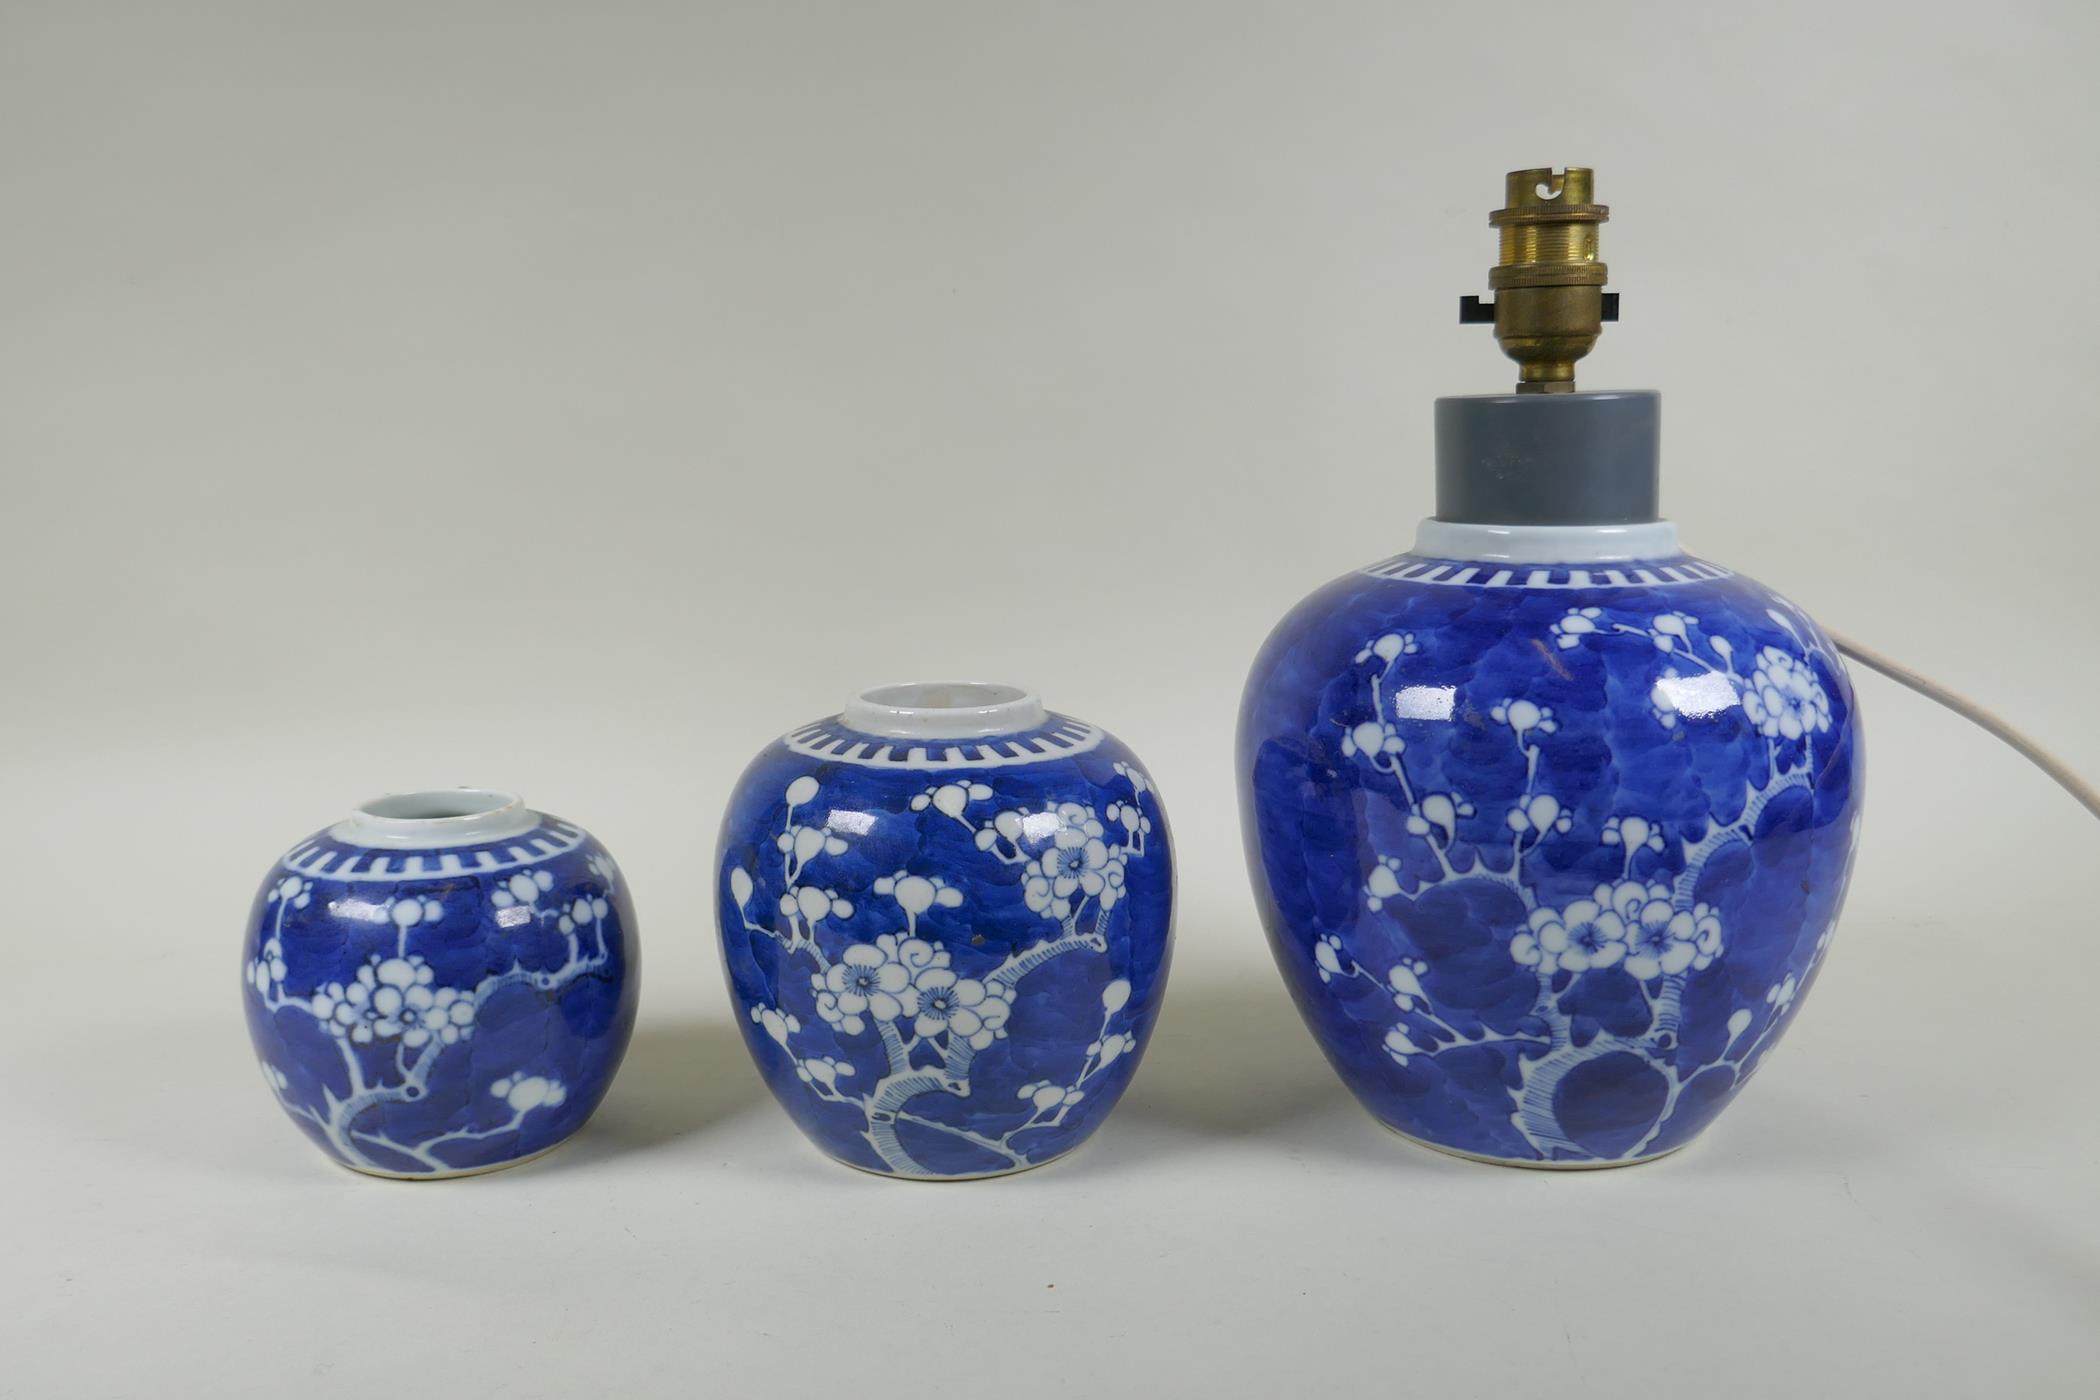 Three Chinese blue and white porcelain graduated ginger jars, decorated with prunus blossom on a